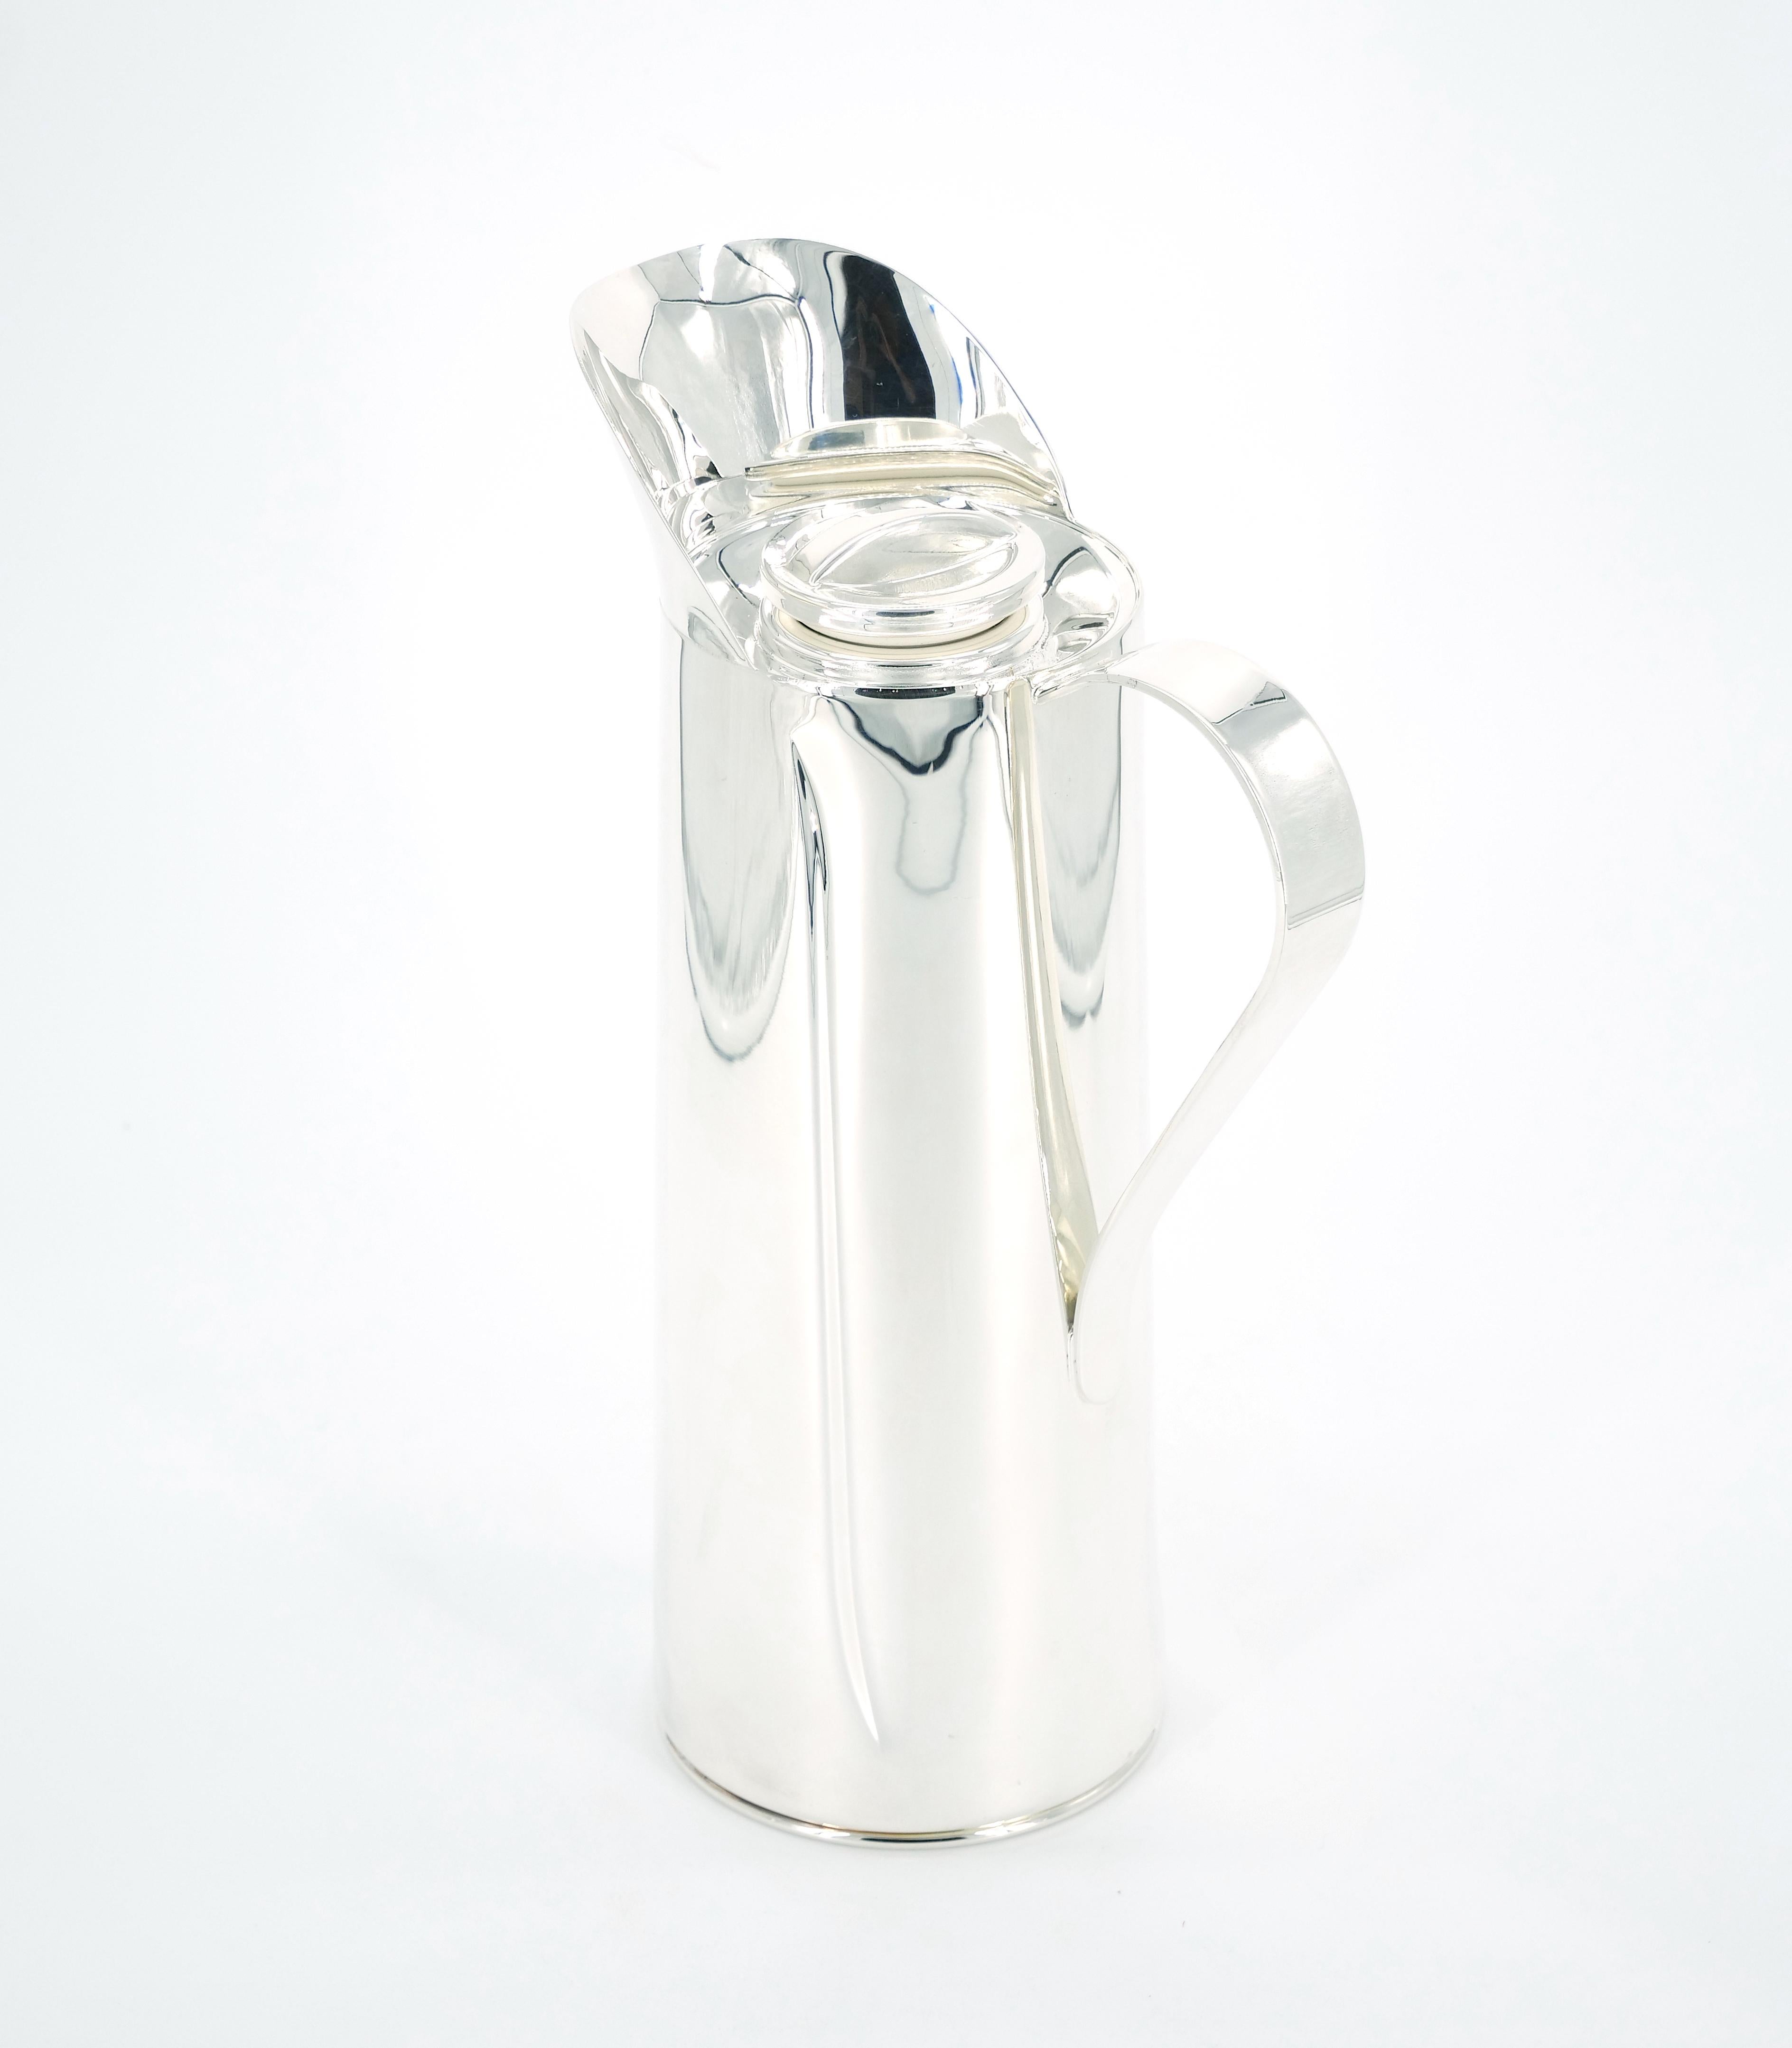 Indulge in the perfect blend of style and functionality with our Italian Silver Plated Insulated Interior Hot/Cold Beverage Thermos. This sophisticated thermos boasts an Art Deco-inspired design characterized by clean lines, a one-side handle for